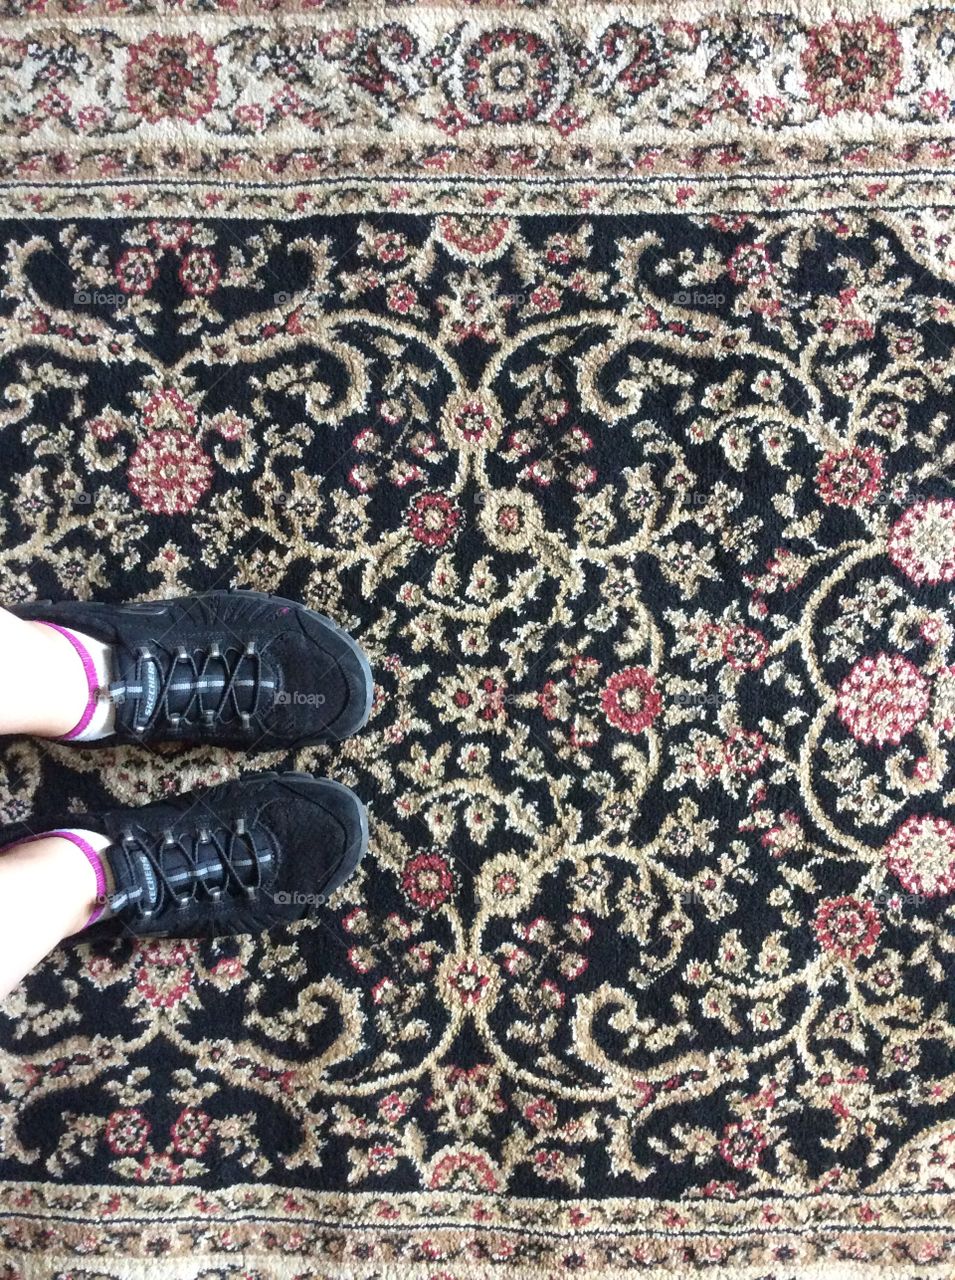 Standing on 1 of many rugs in the work place.